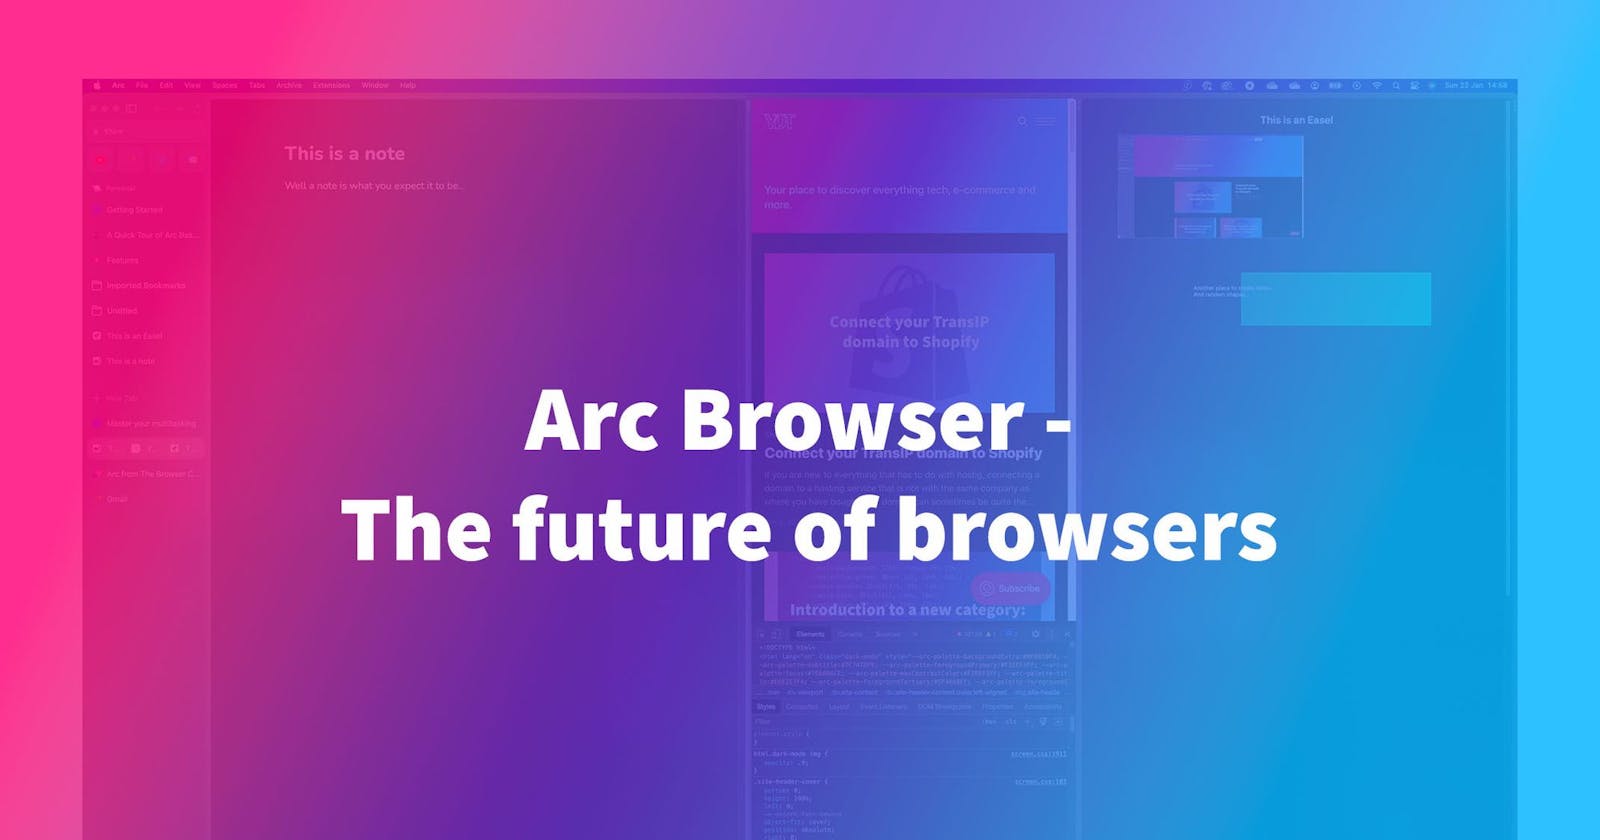 This browser is the Chrome replacement I’ve been waiting for!